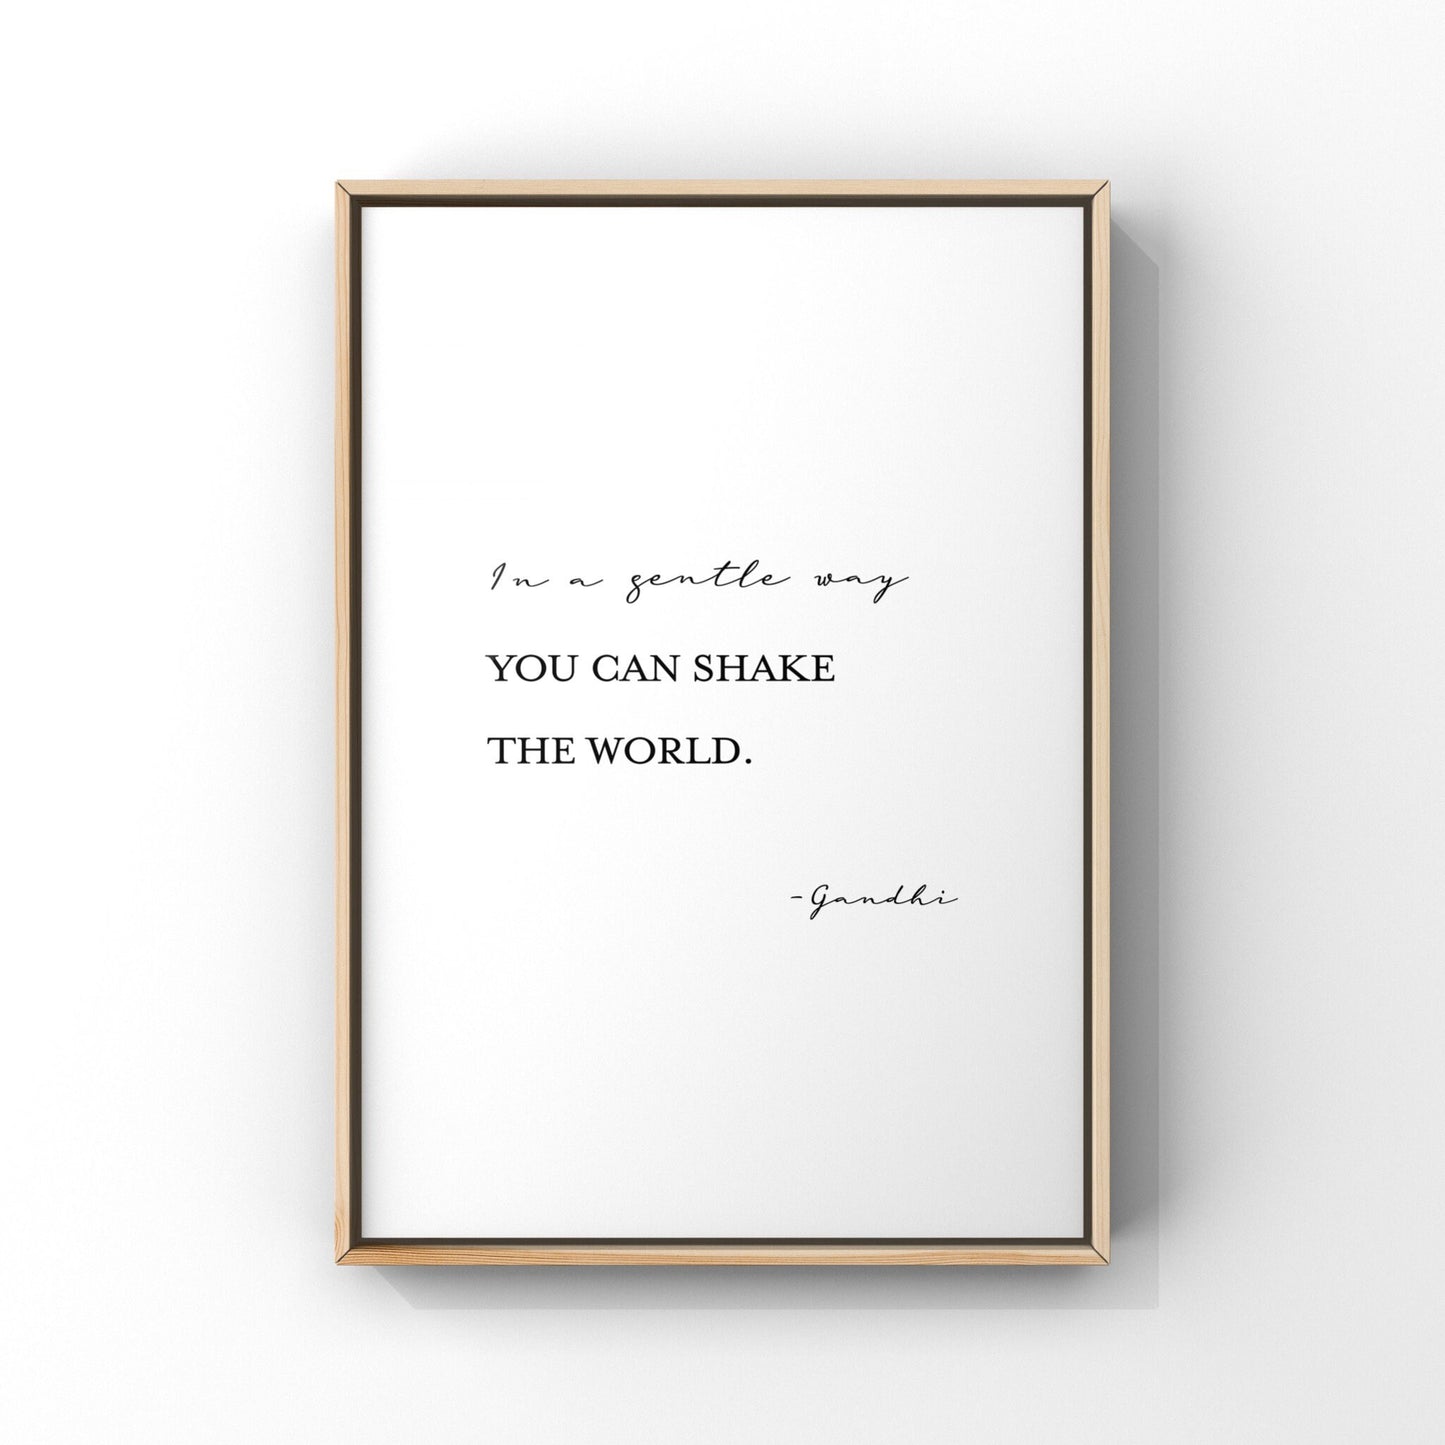 In a gentle way you can shake the world,Mahatma Gandhi quote,Inspirational quote print,Office decor,Motivational quote